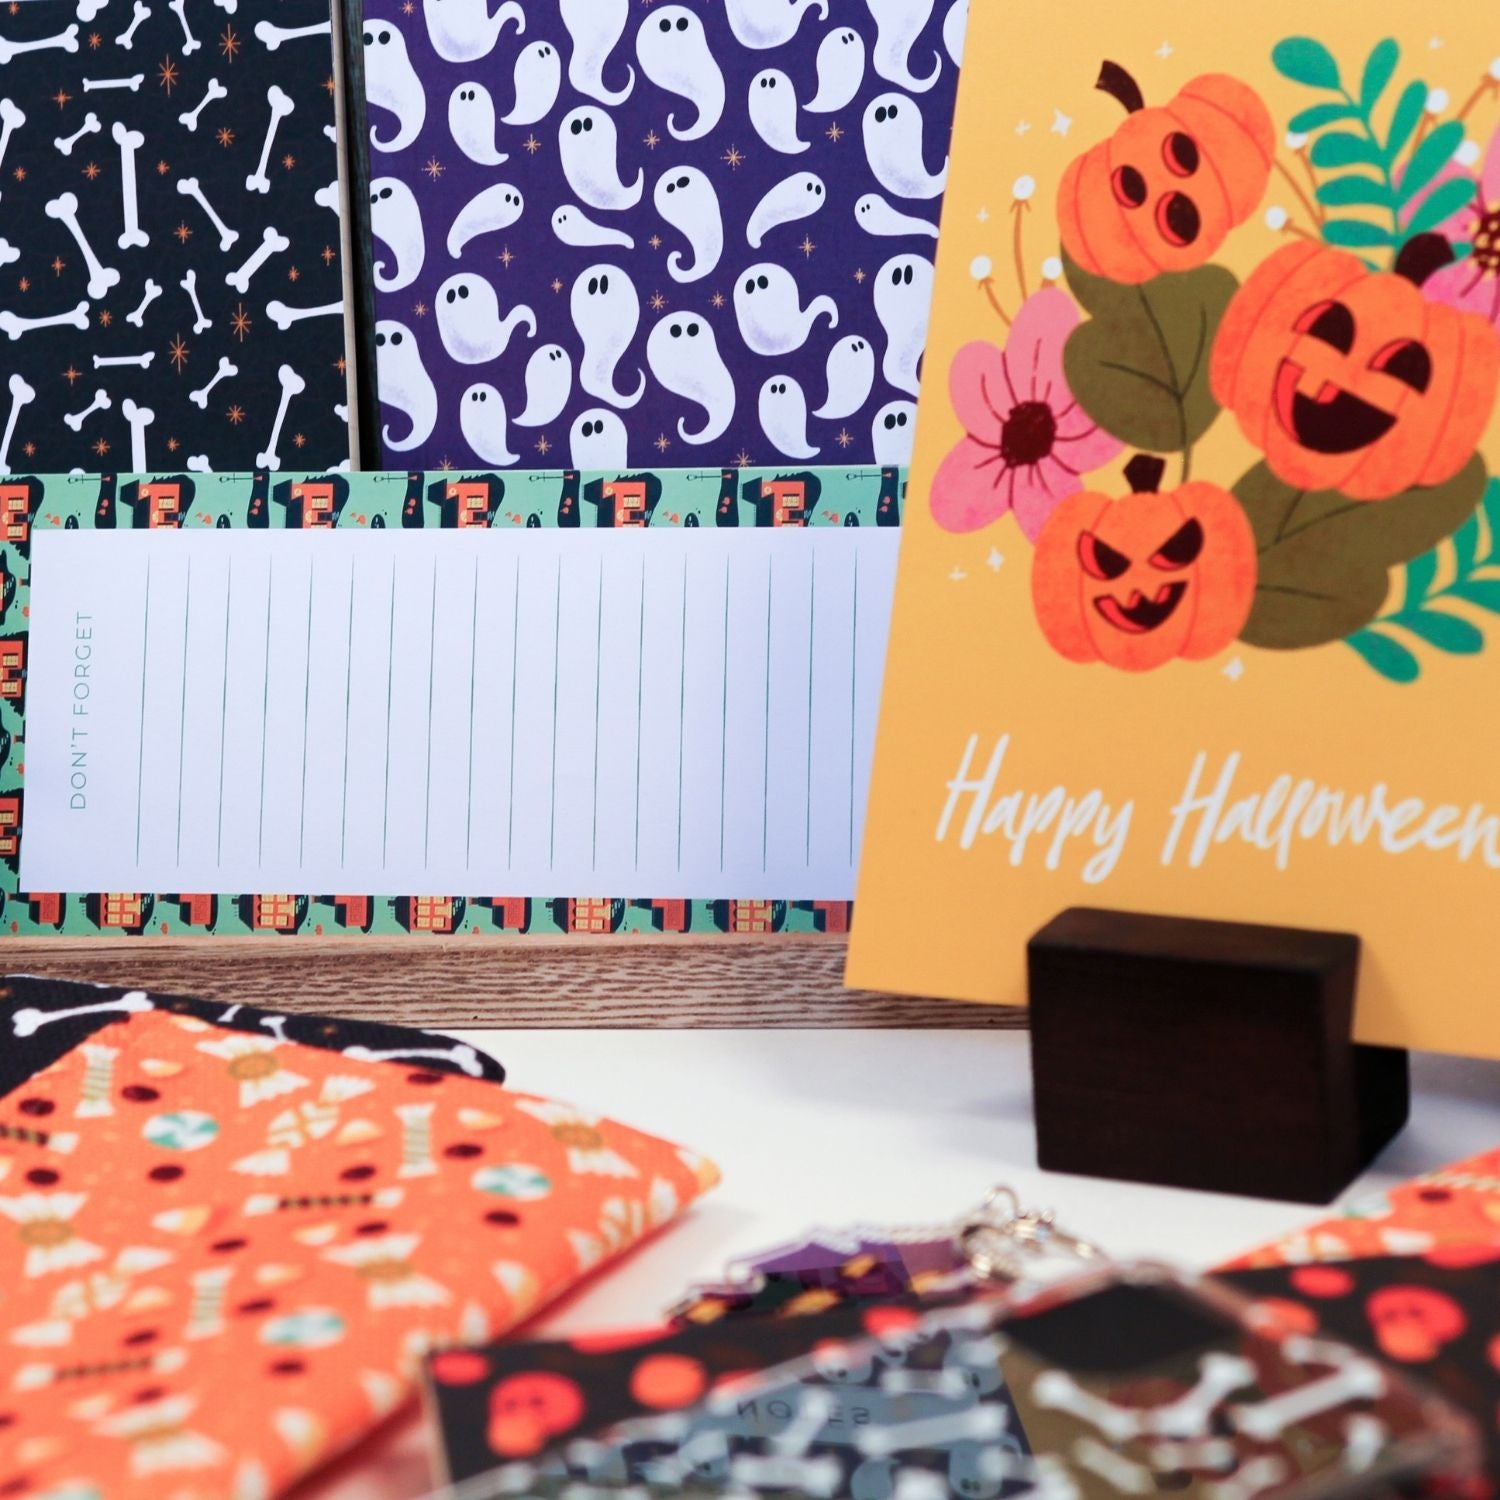 How to Make the Perfect Spooky Gift Basket for Halloween